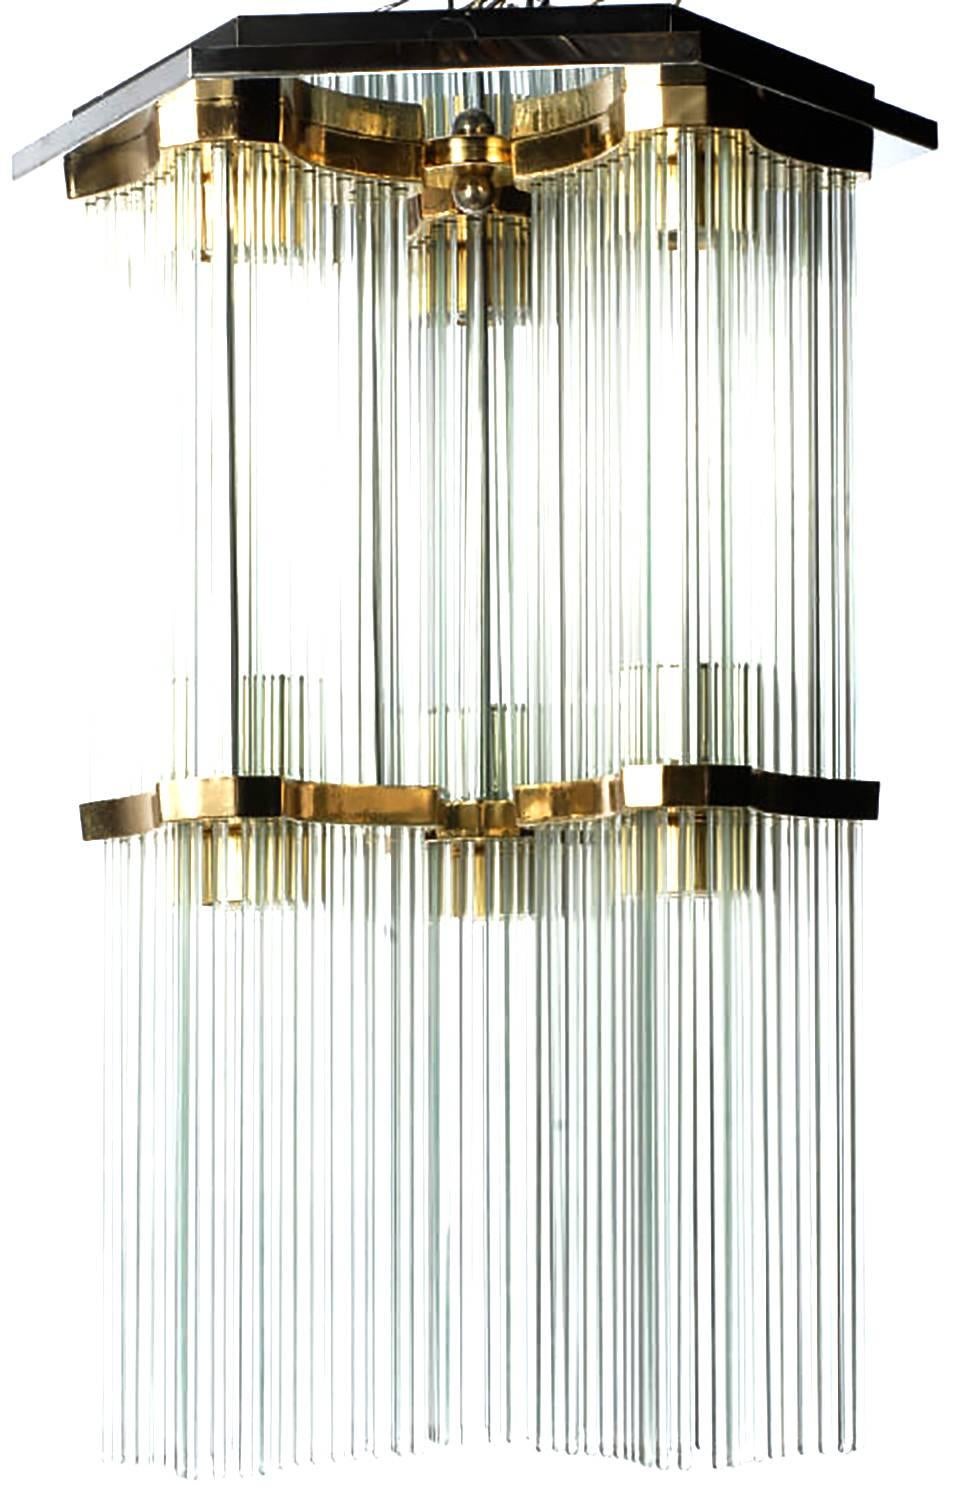 Gaetano Sciolari for Lightolier glass rod and brass two-tiered waterfall flush mount chandelier. Chrome-plated hexagonal ceiling mount with six brass plated reverse trefoil fitters. Six lights, one light for each glass rod section.